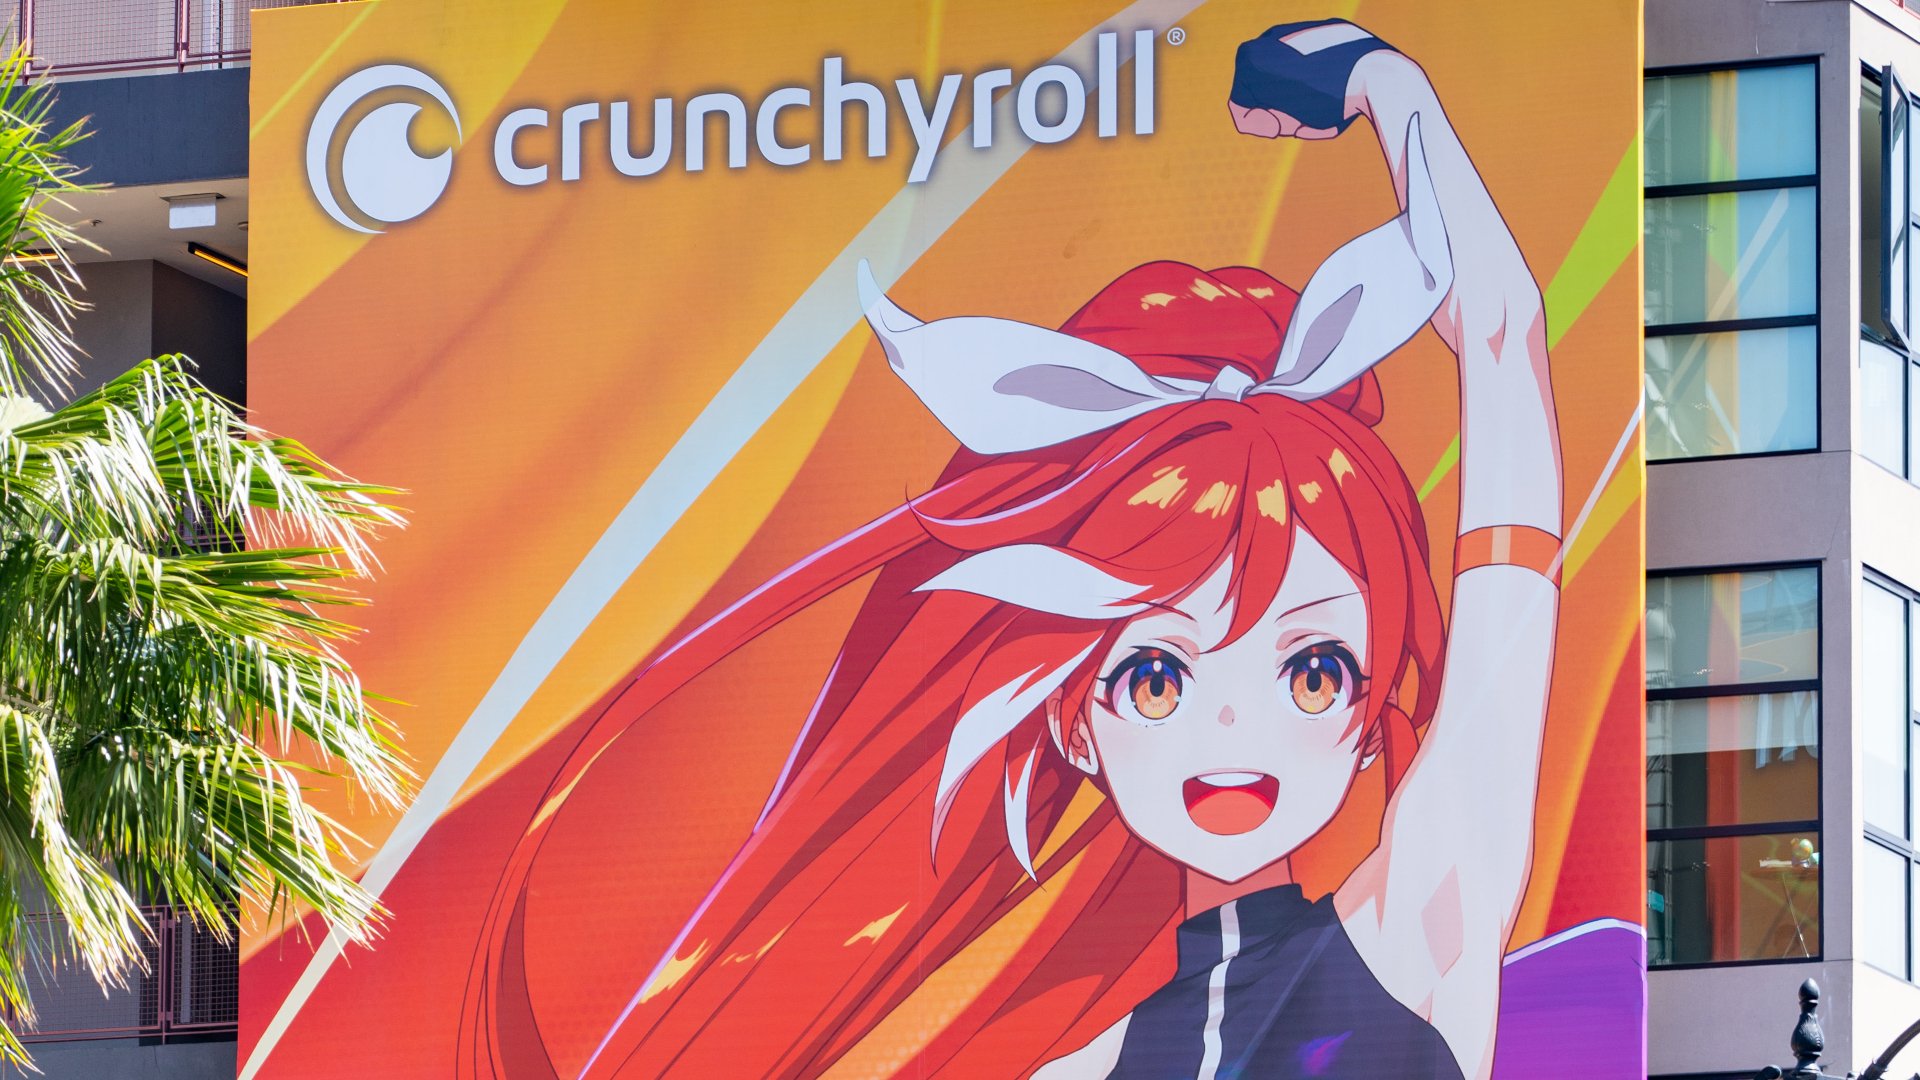 Crunchyroll - —An opening can't make you cry. The opening